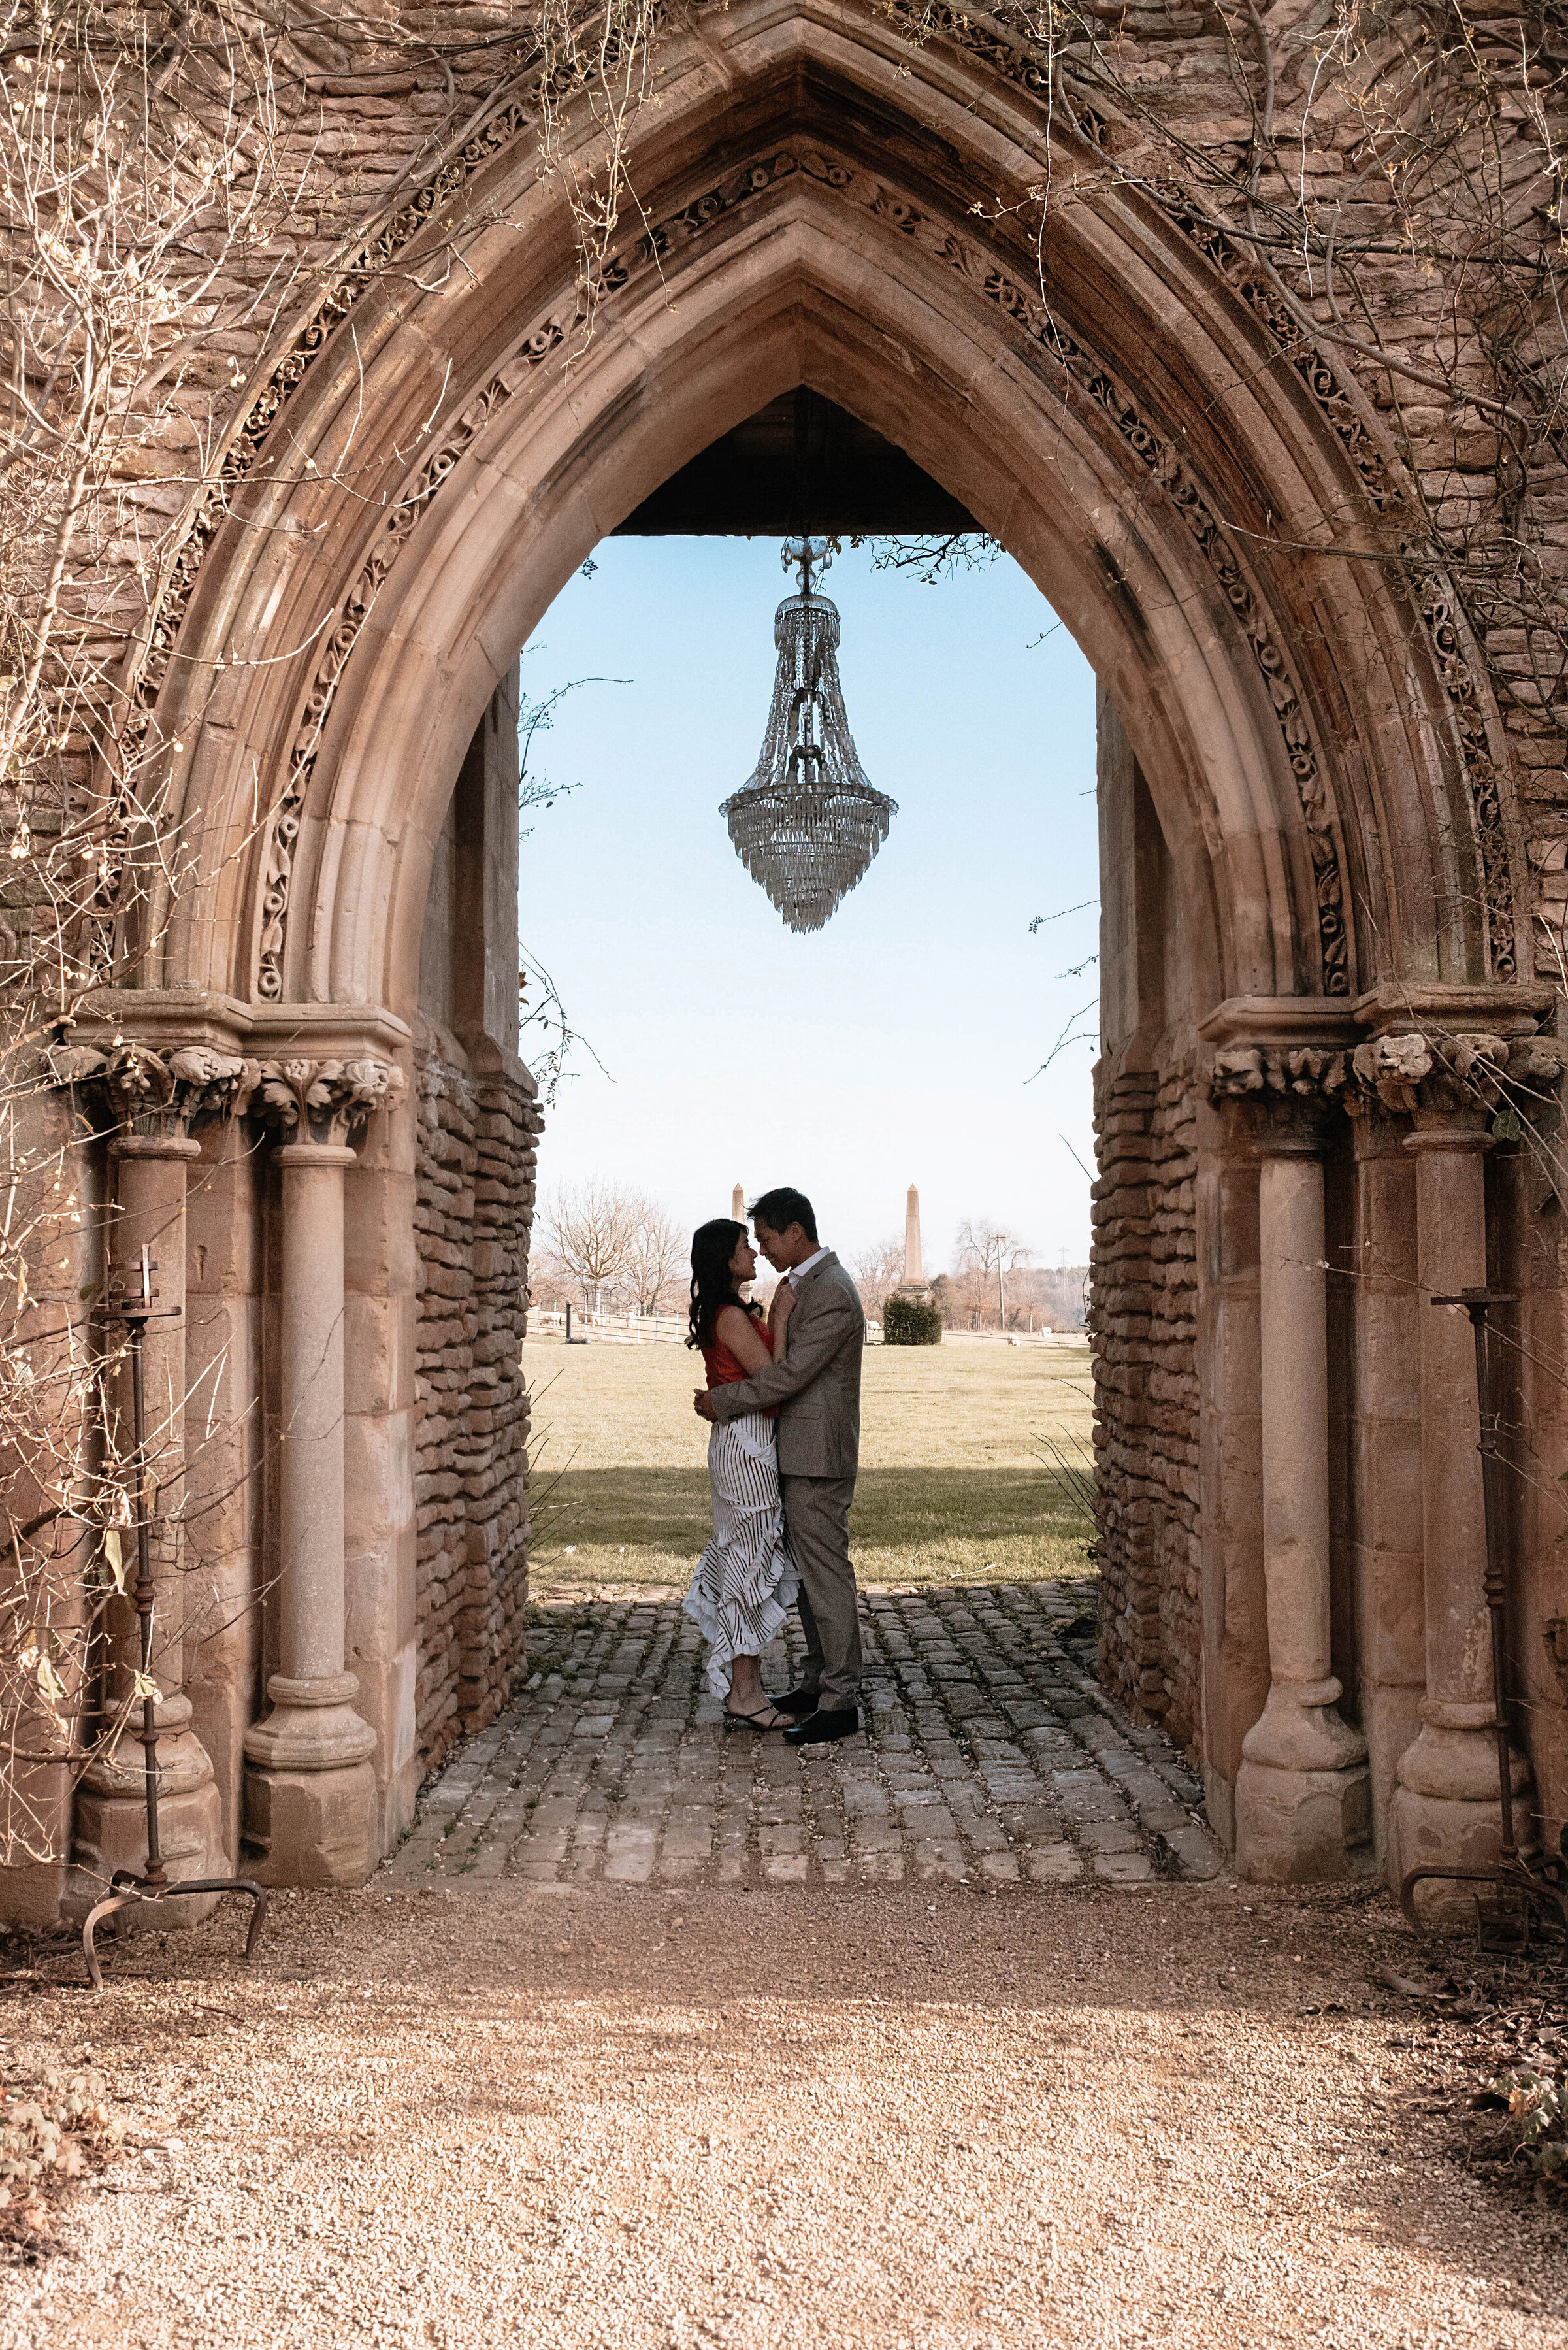 Man and woman embracing standing beneath the famous crystal chandelier hanging in the archway at Euridge Manor